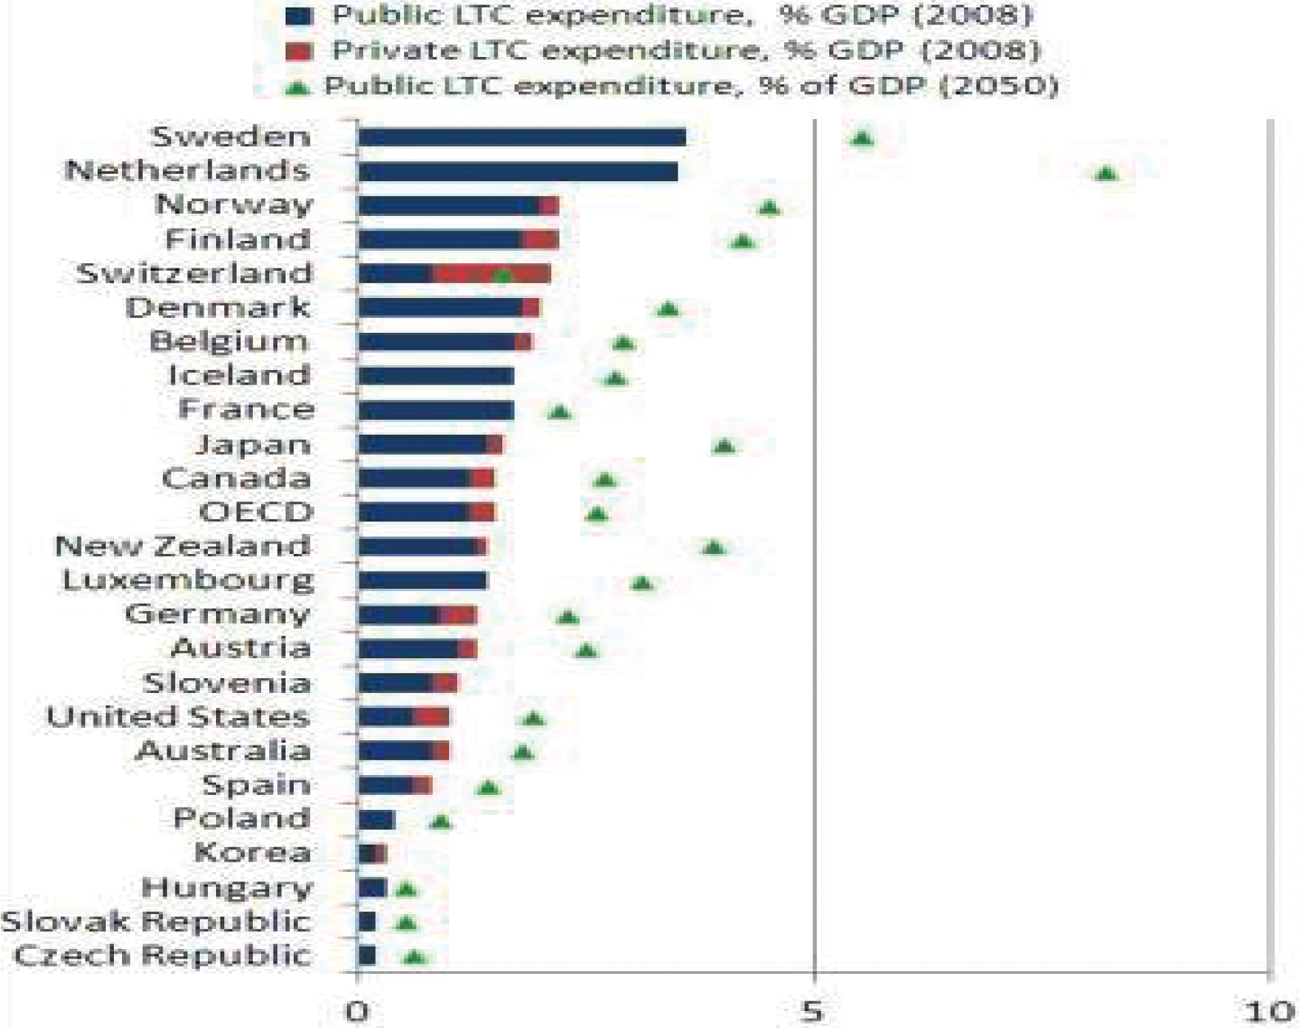 Public and private LTC expenditure in the OECD, 2008 and 2050